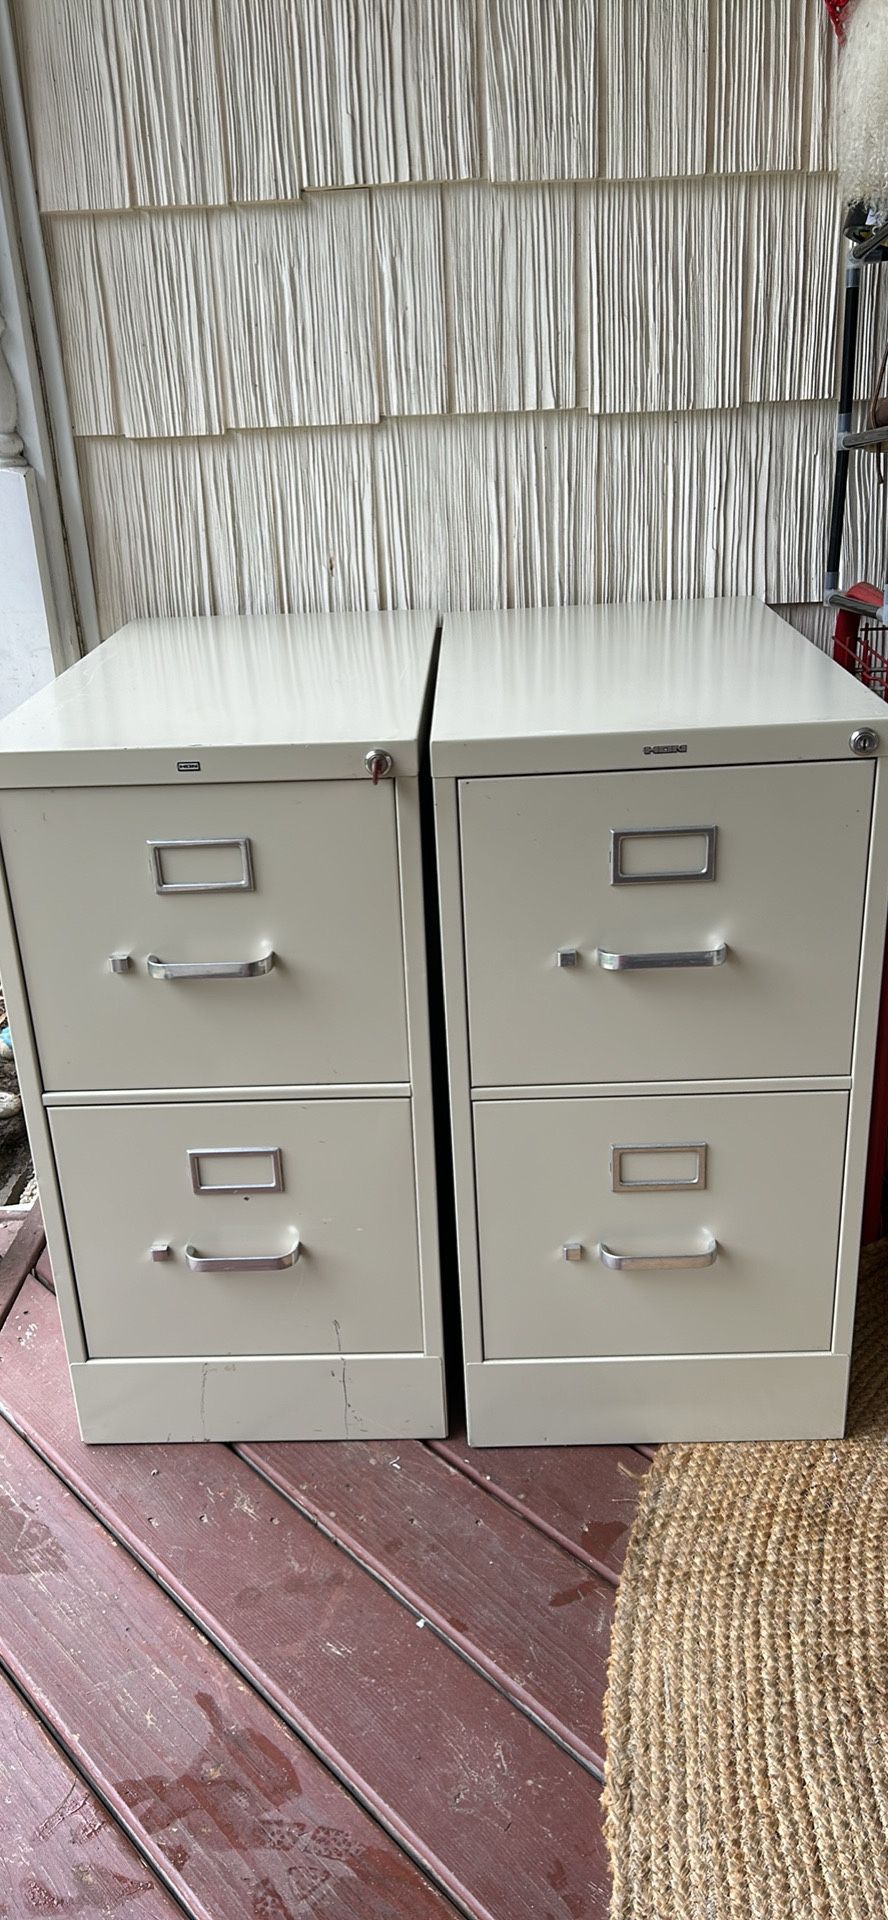 Filing Cabinet 🗄️ Only 1 Has Key 🔑 